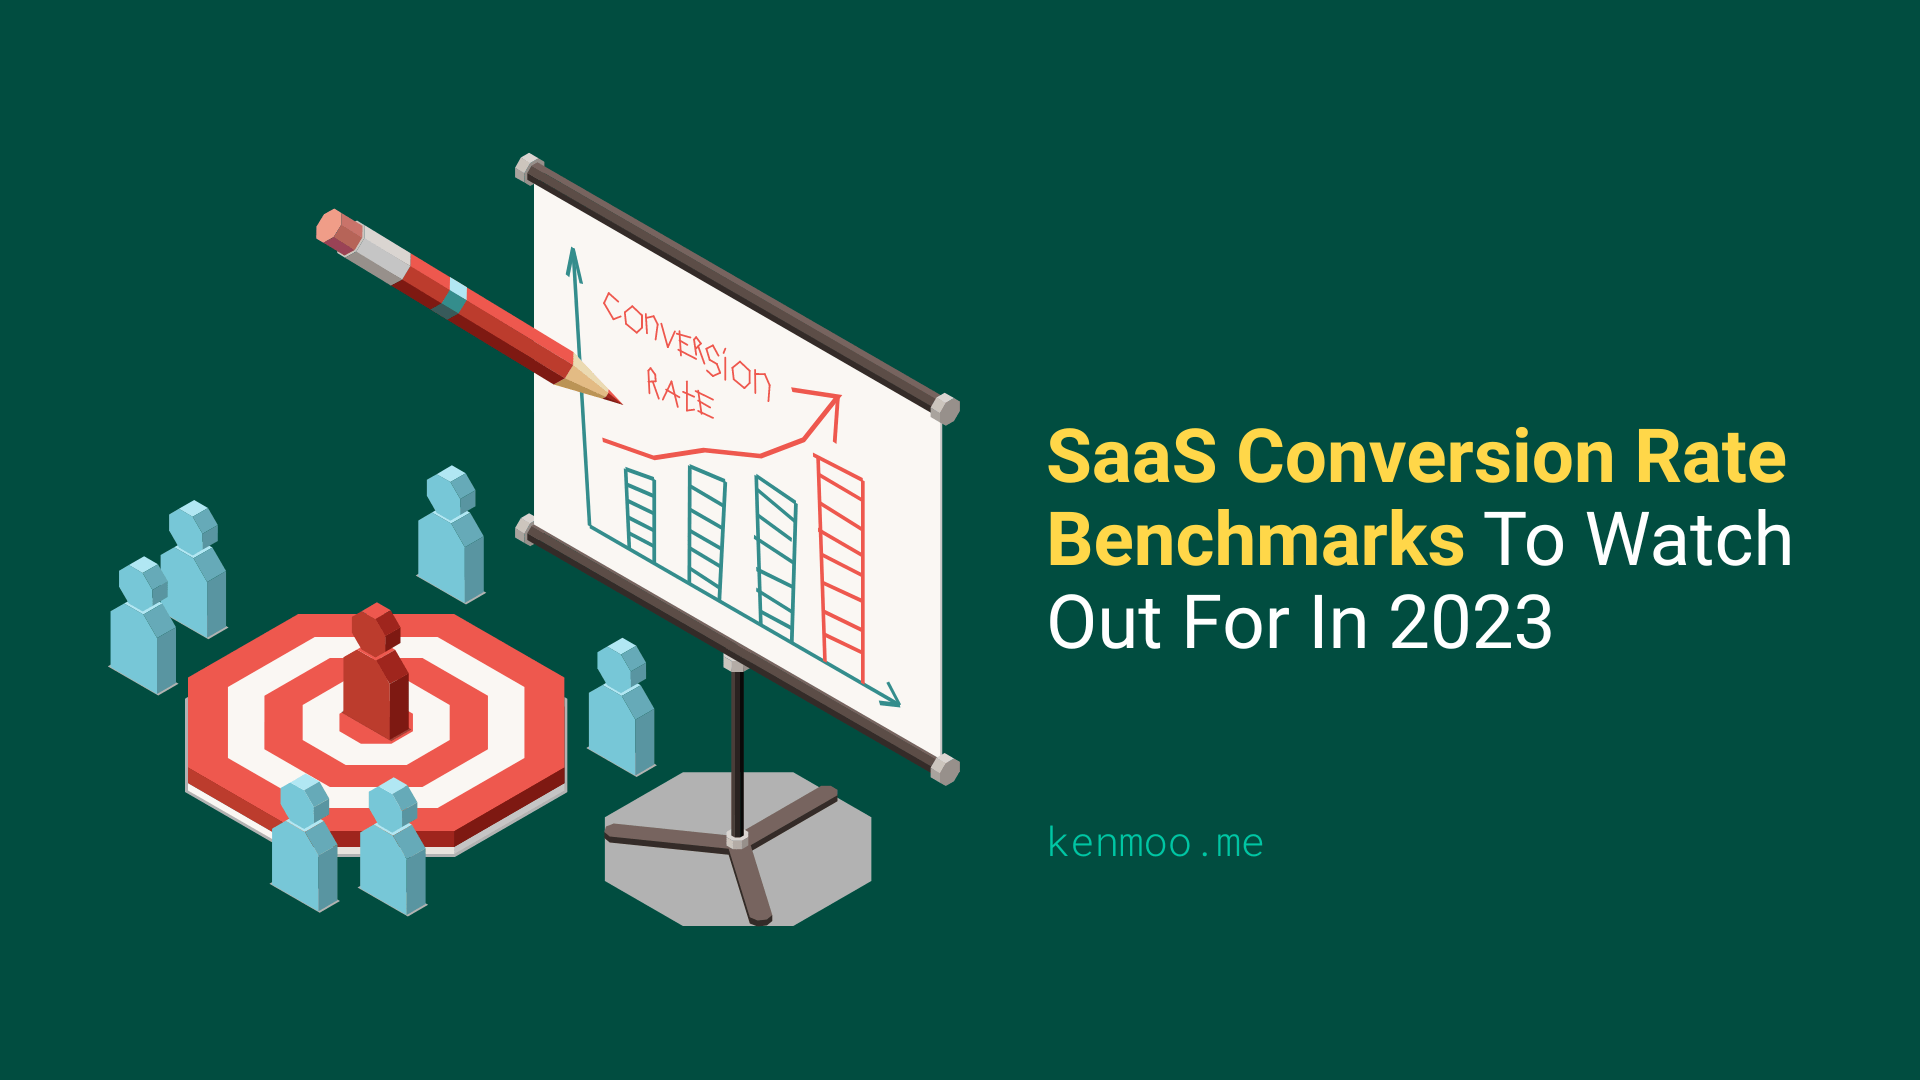 SaaS Conversion Rate Benchmarks To Watch Out For In 2023